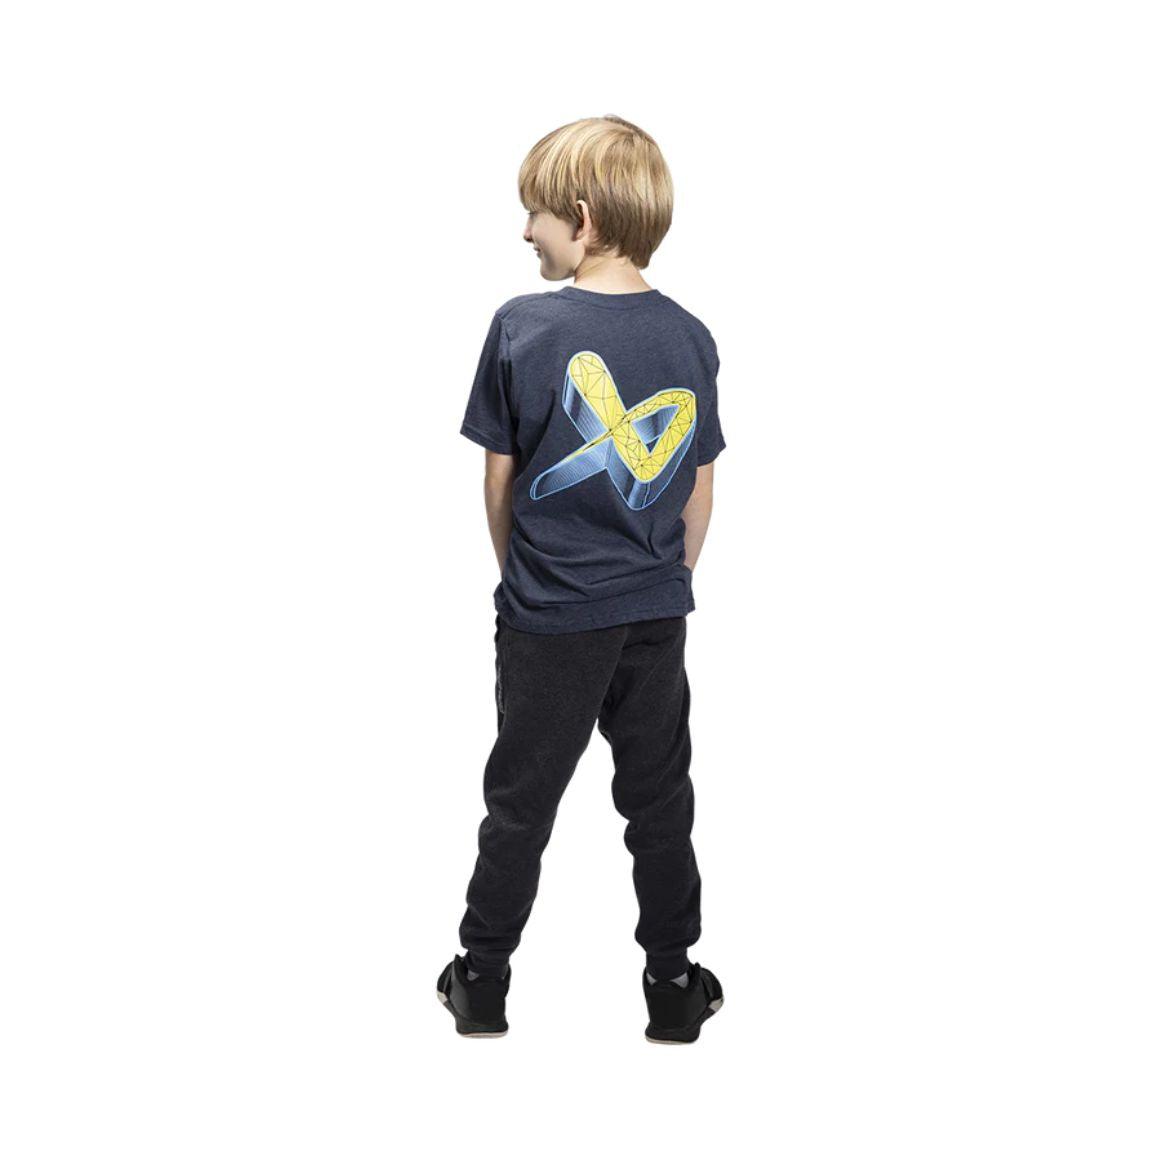 Bauer Exploded Icon Tee - Youth - Sports Excellence